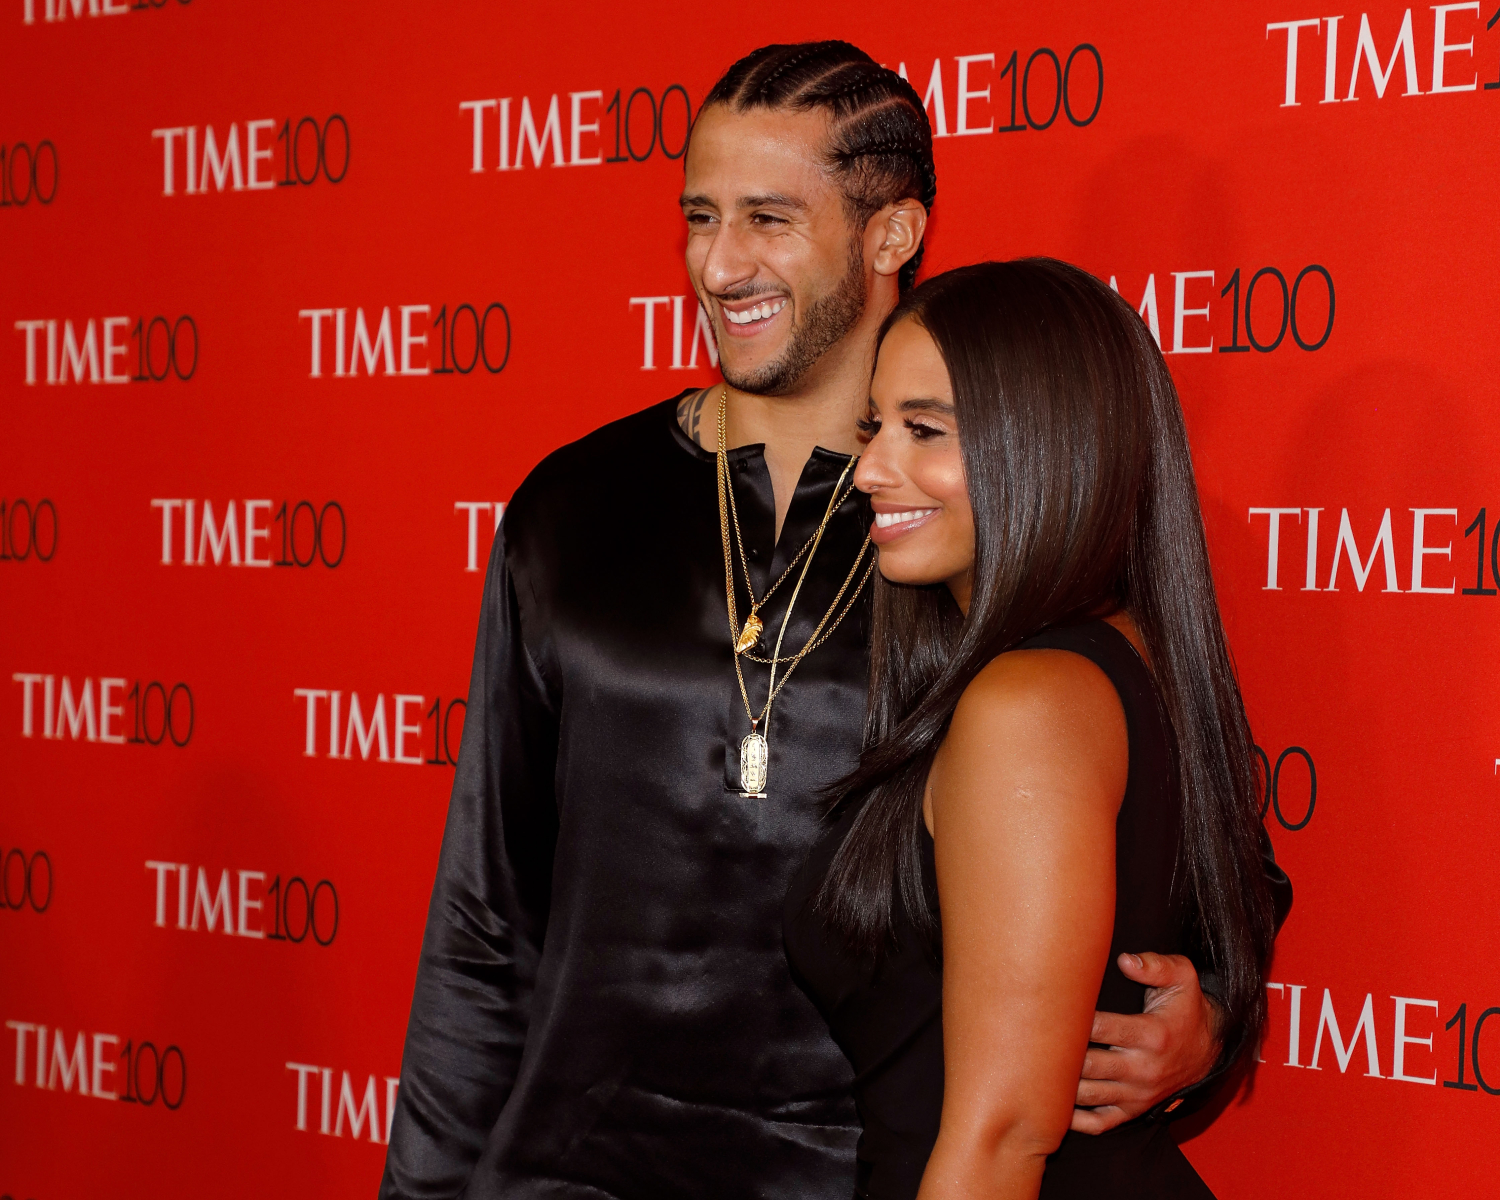 Big news was announced on Monday about a new deal that Colin Kaepernick is a part of. His girlfriend Nessa took to social media to react.